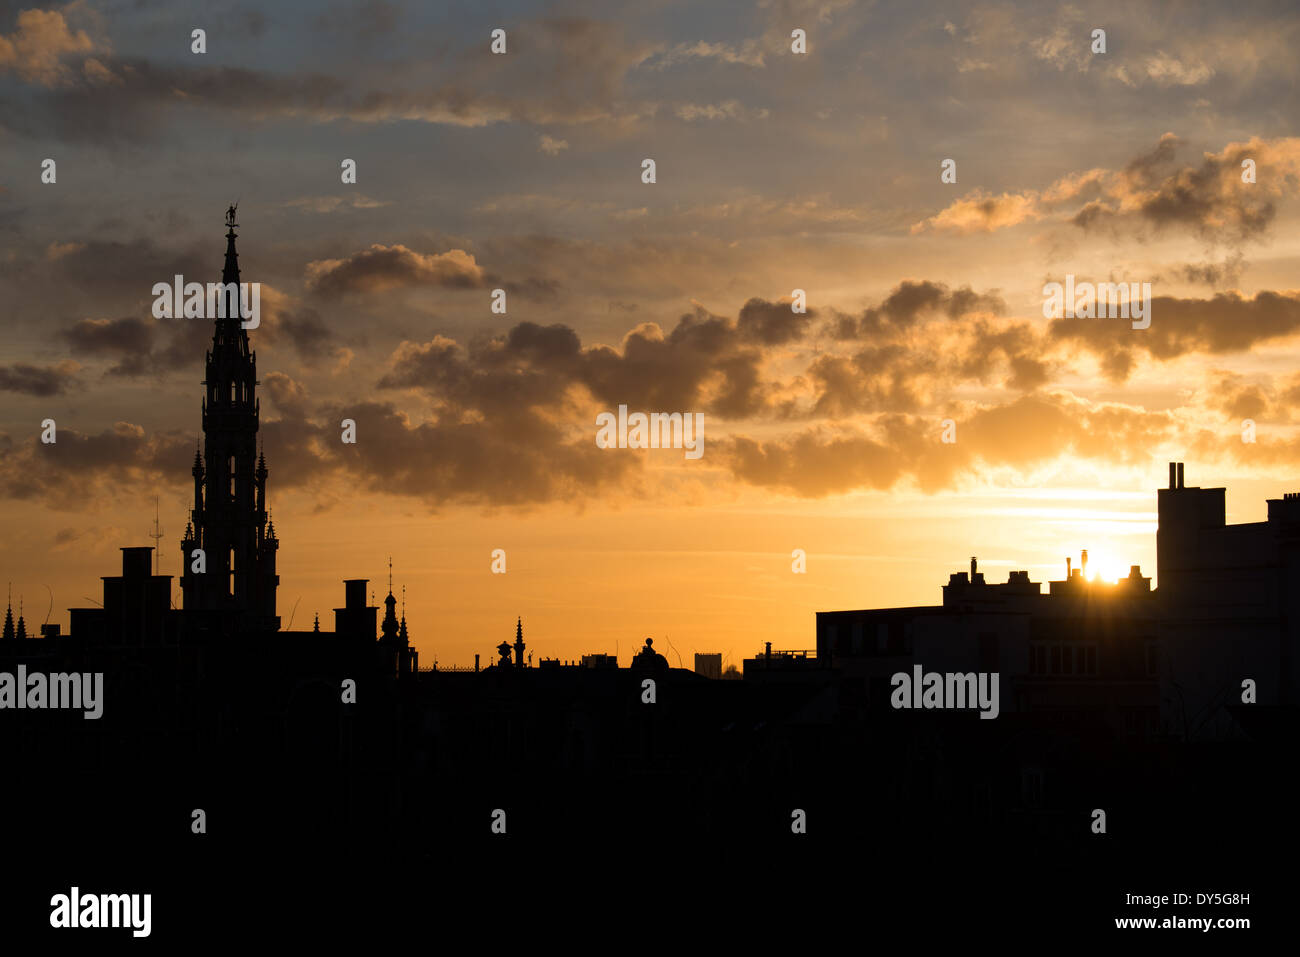 The silhouette of Brussels skyline at sunset against a golden sky with a few clouds. The tall spire is the tower of the Brussels Town Hall (Hotel de Ville) standing at 96 meters. Stock Photo